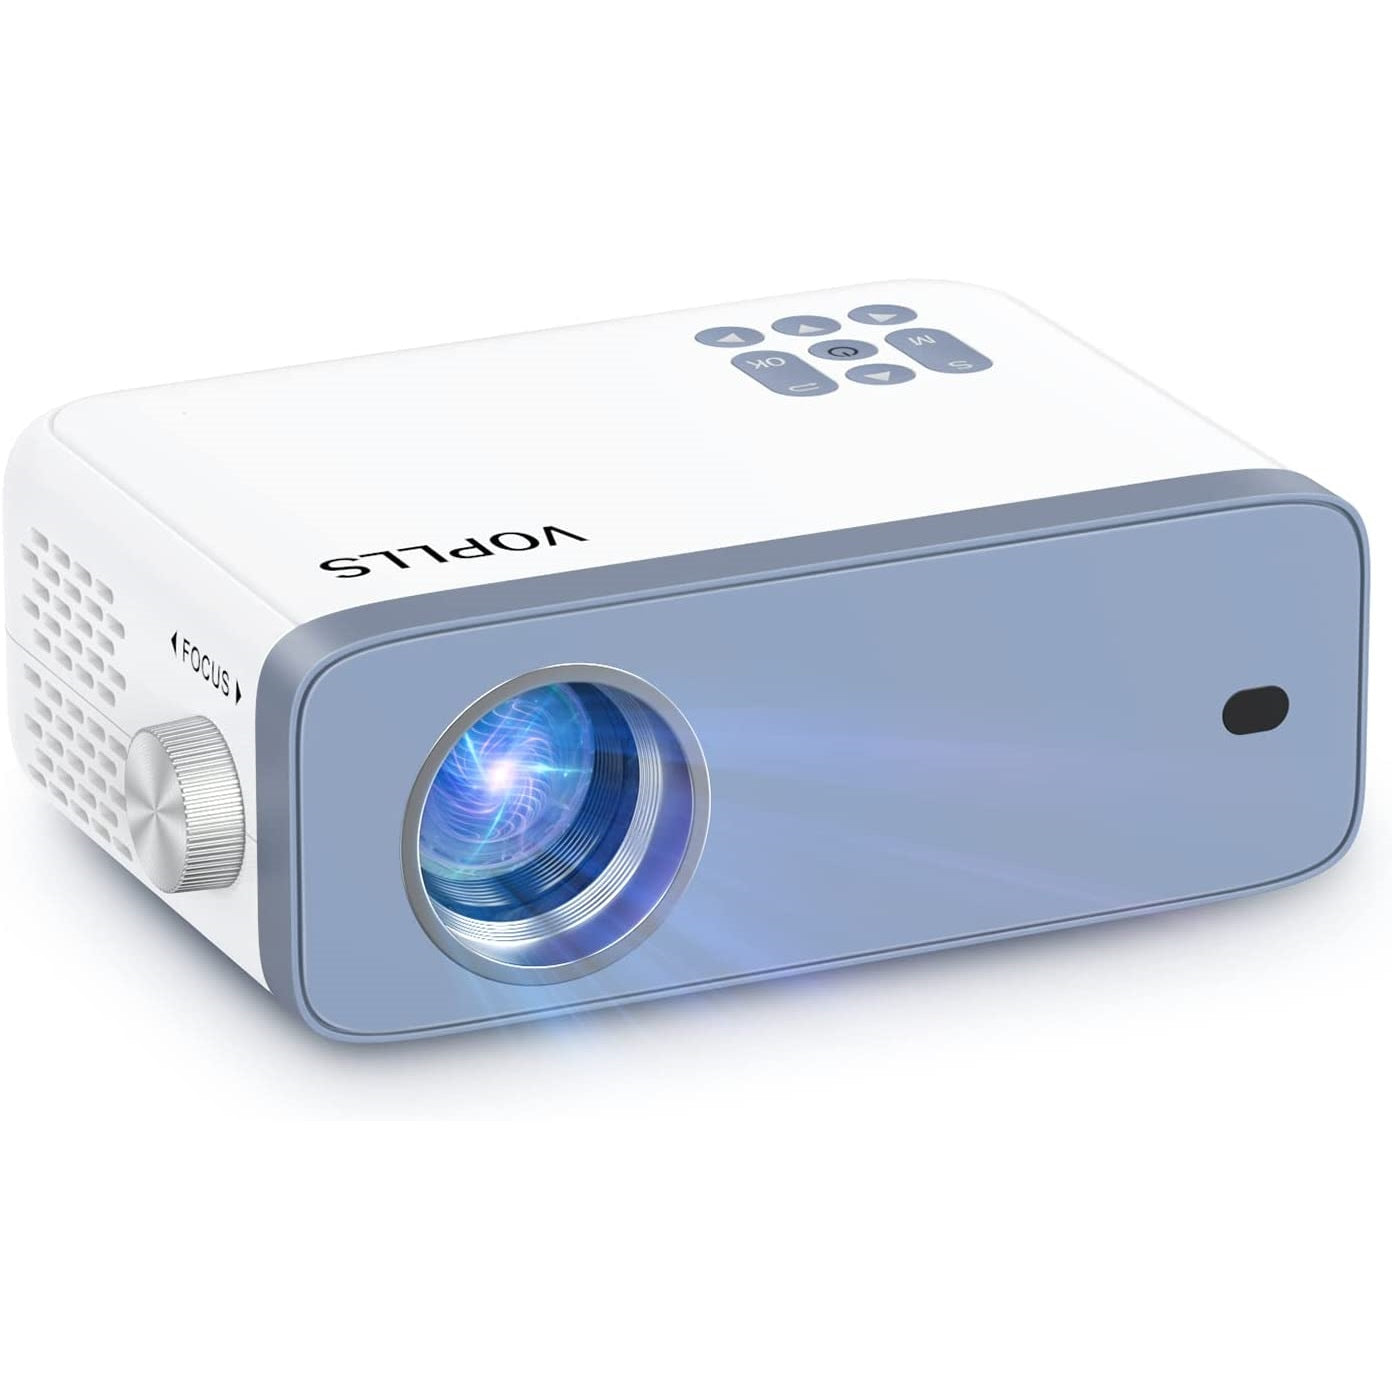 VOPLLS Vision: The Compact, High-Definition Projector